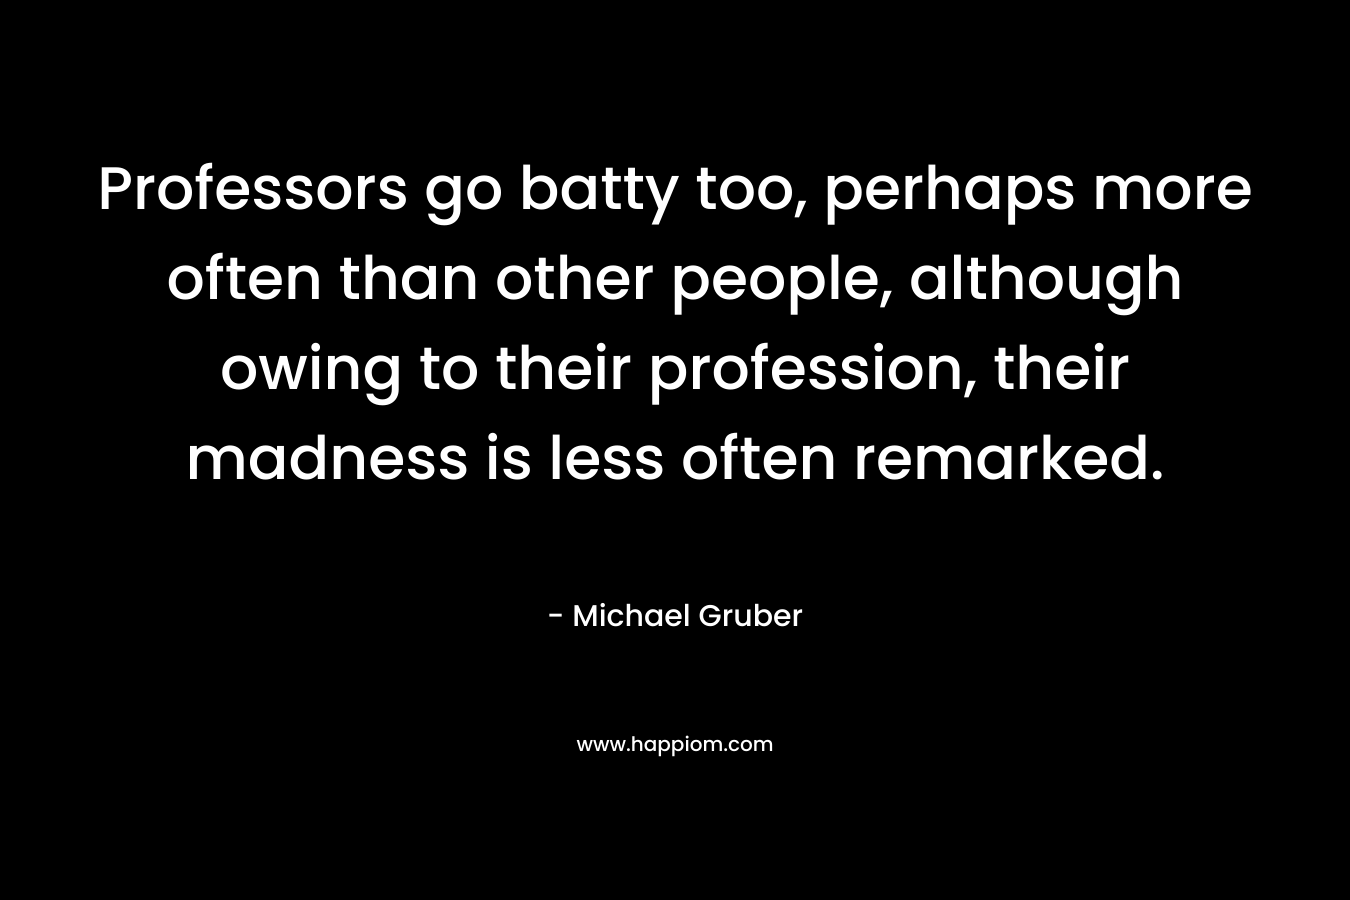 Professors go batty too, perhaps more often than other people, although owing to their profession, their madness is less often remarked.  – Michael Gruber